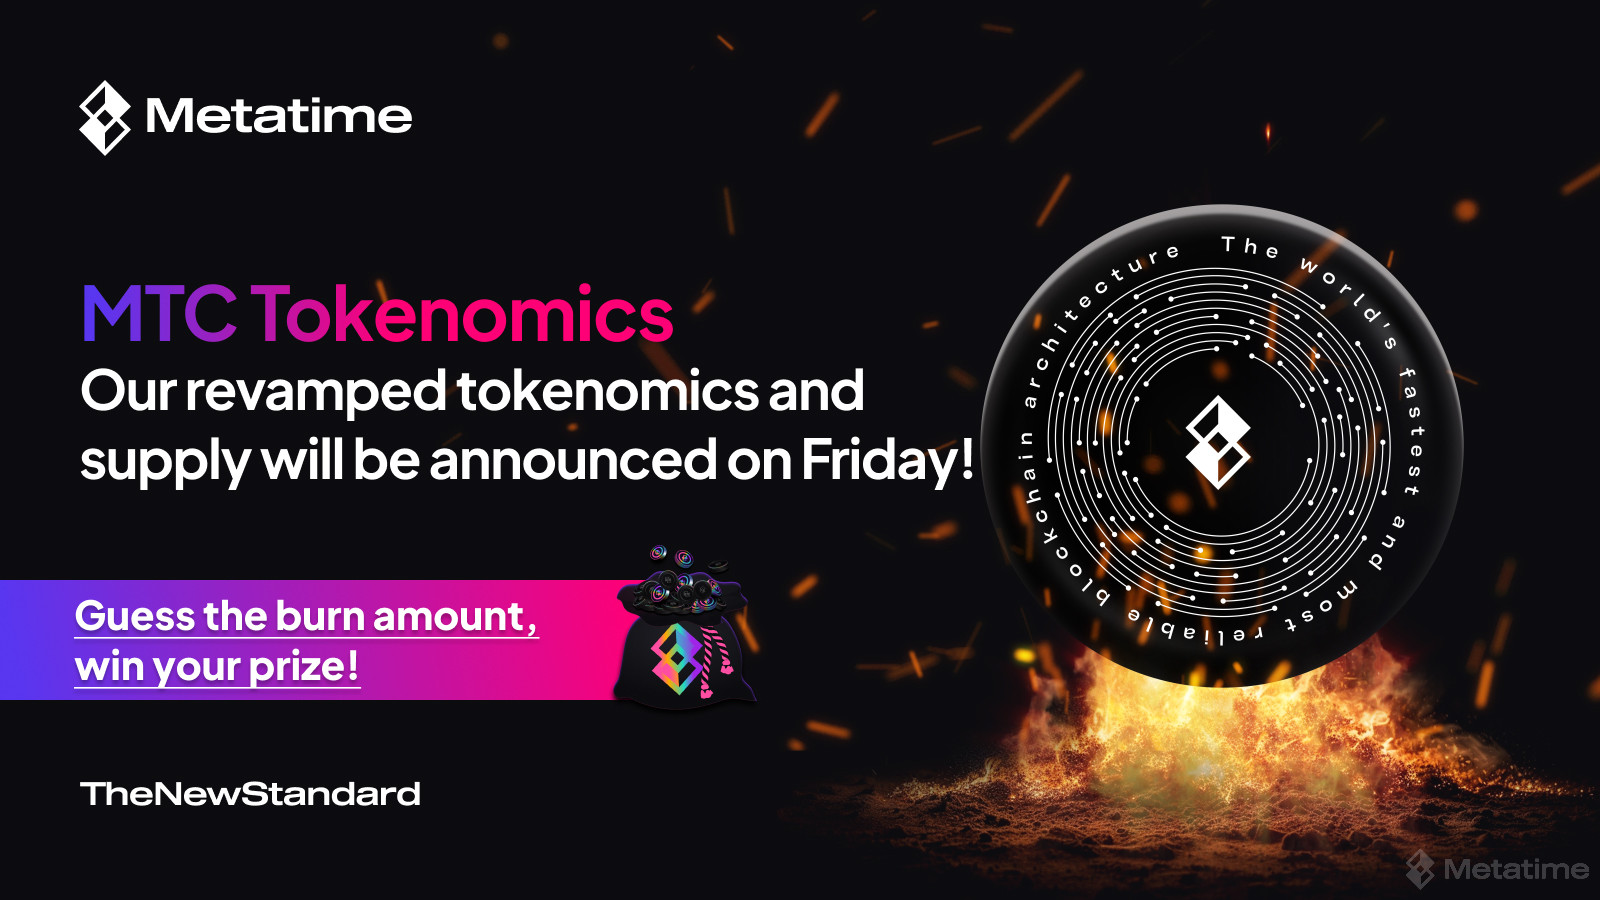 MTC Tokenomics Will Be Announced On Friday!